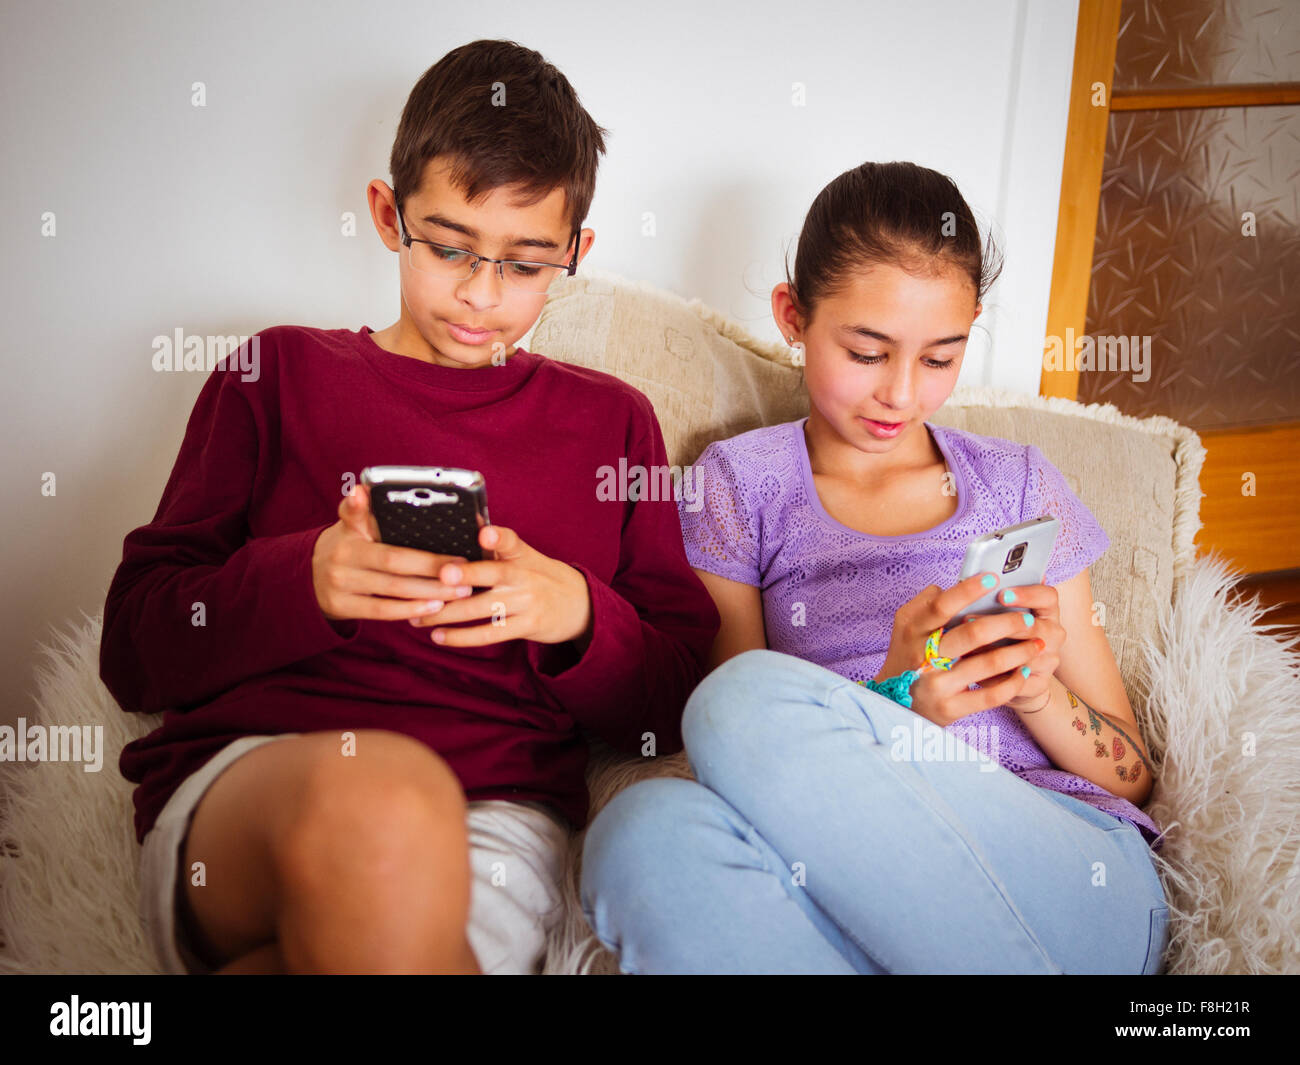 Mixed race children using cell phones Stock Photo